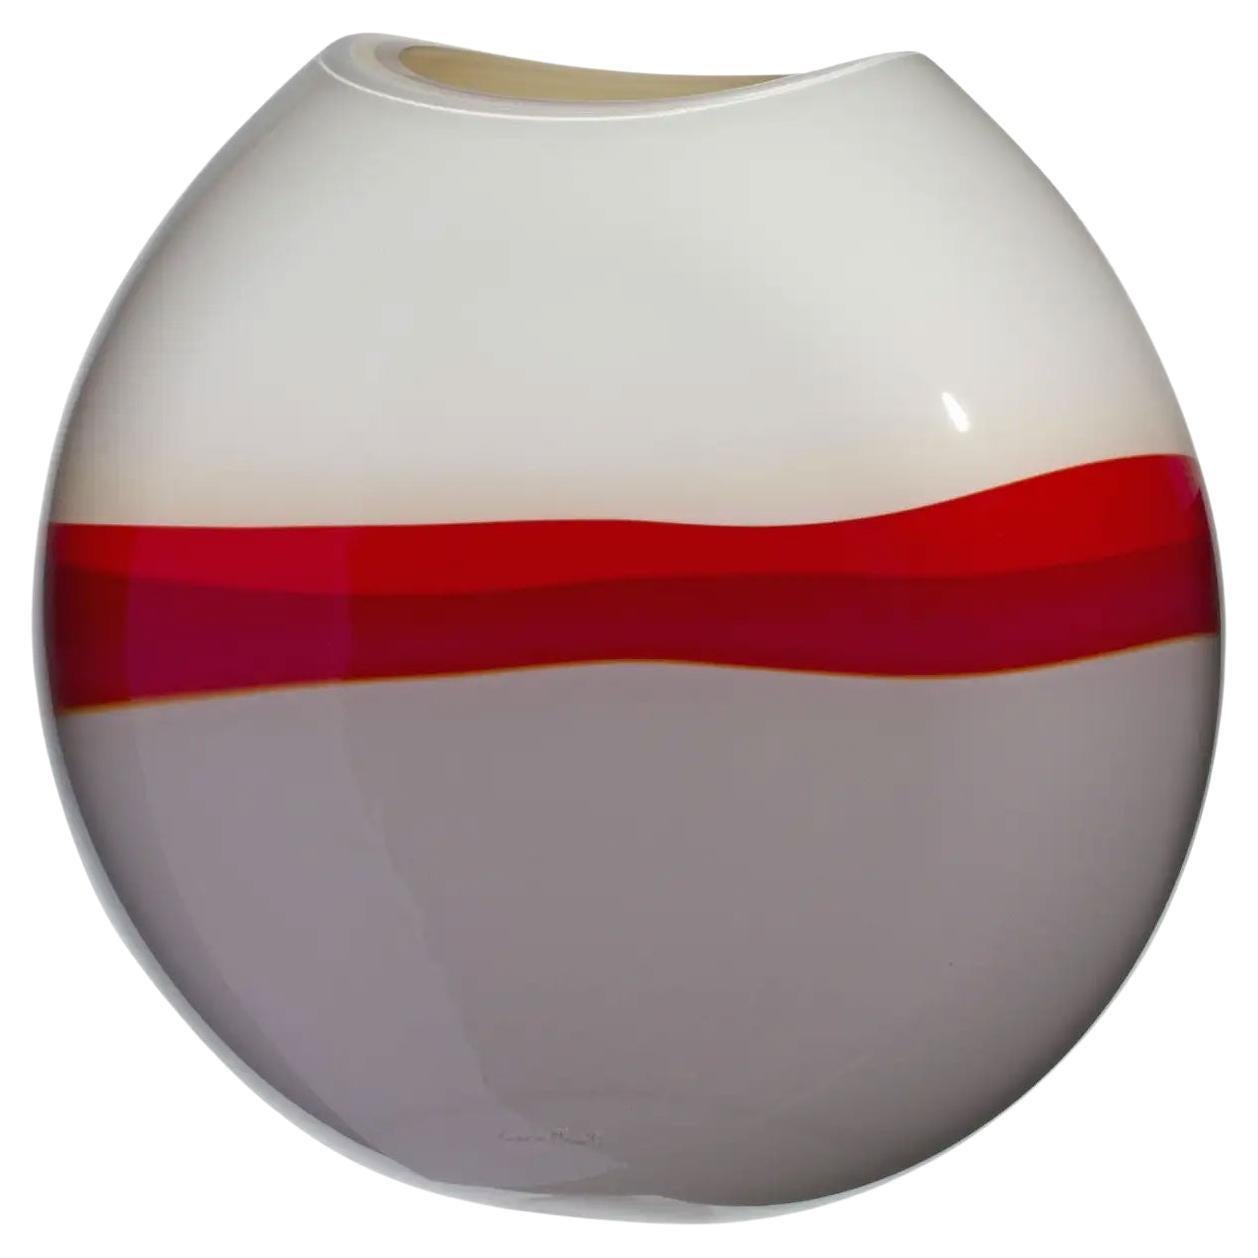 Large Eclissi Vase in Red, Ivory, and Grey by Carlo Moretti